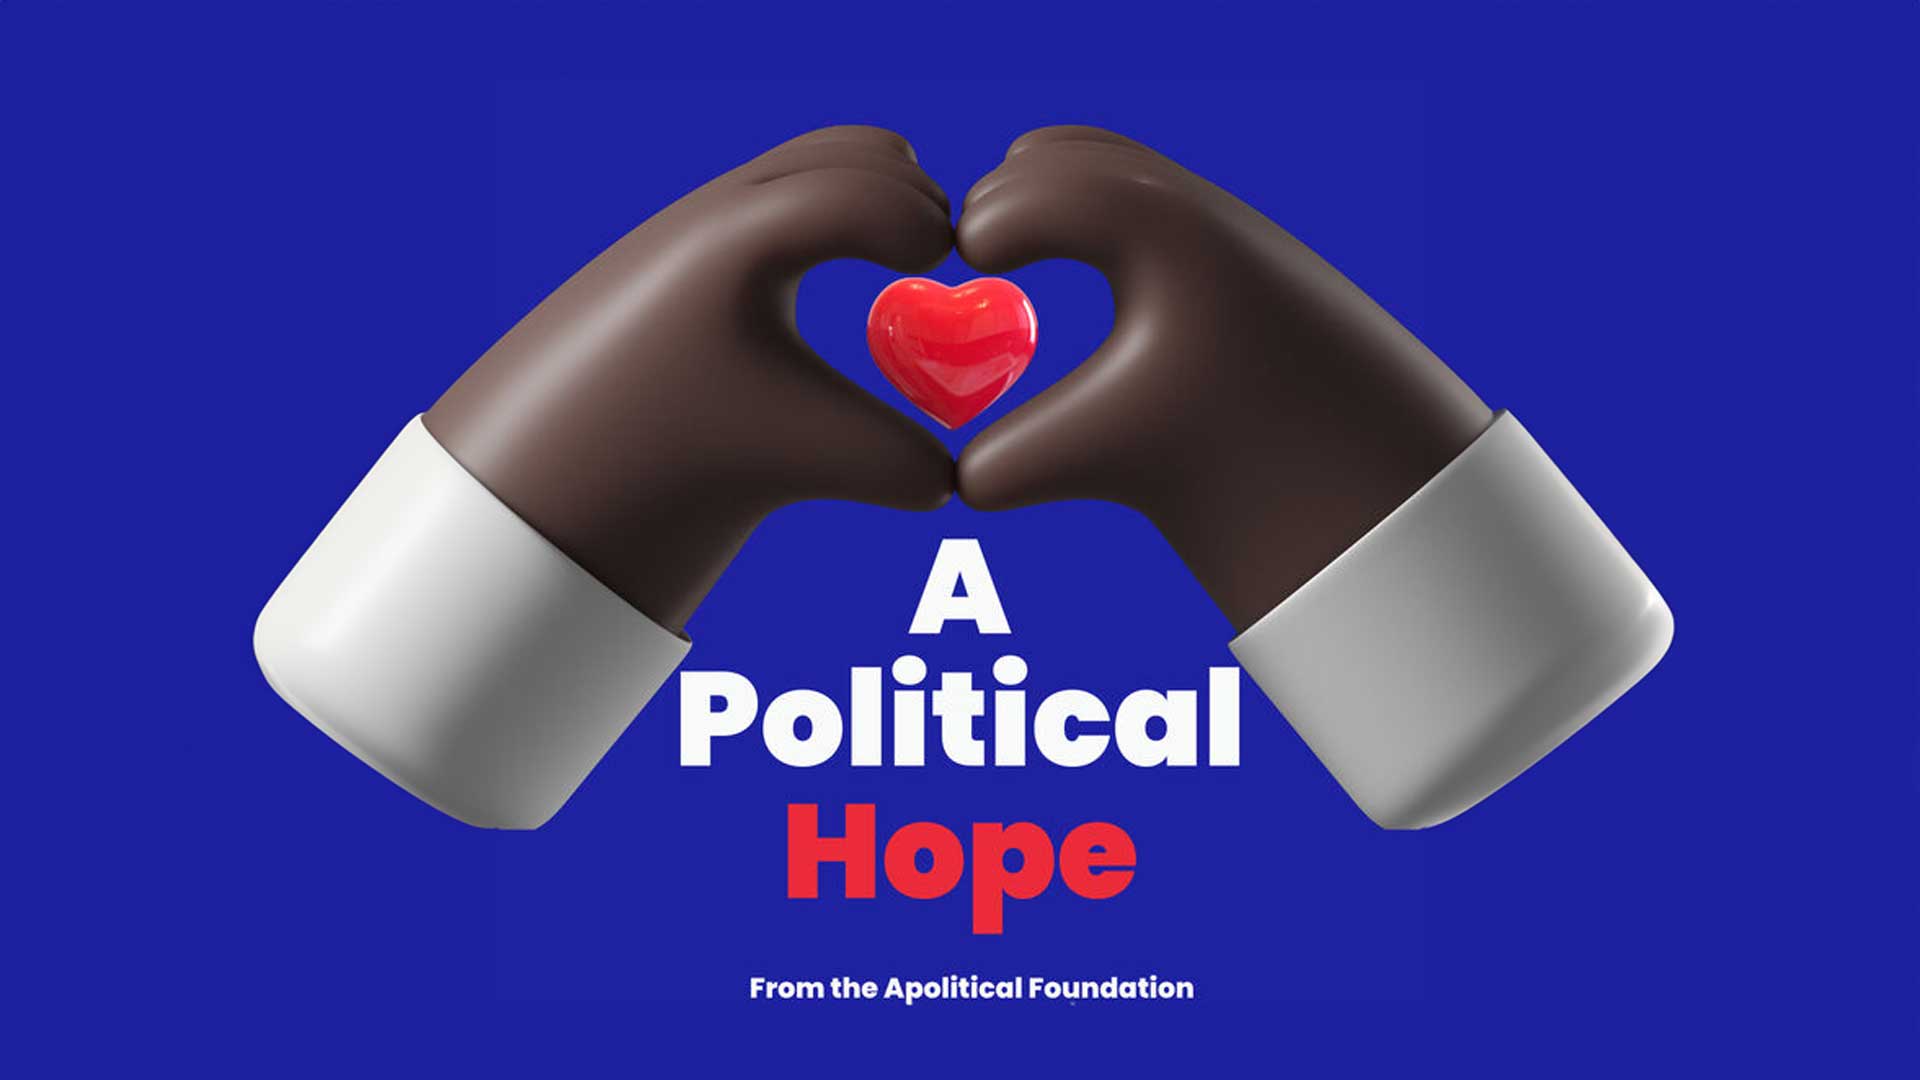 3D drawing of two hands holding a red love hear, with the words: "A Political Hope - From the Apolitical Foundation"